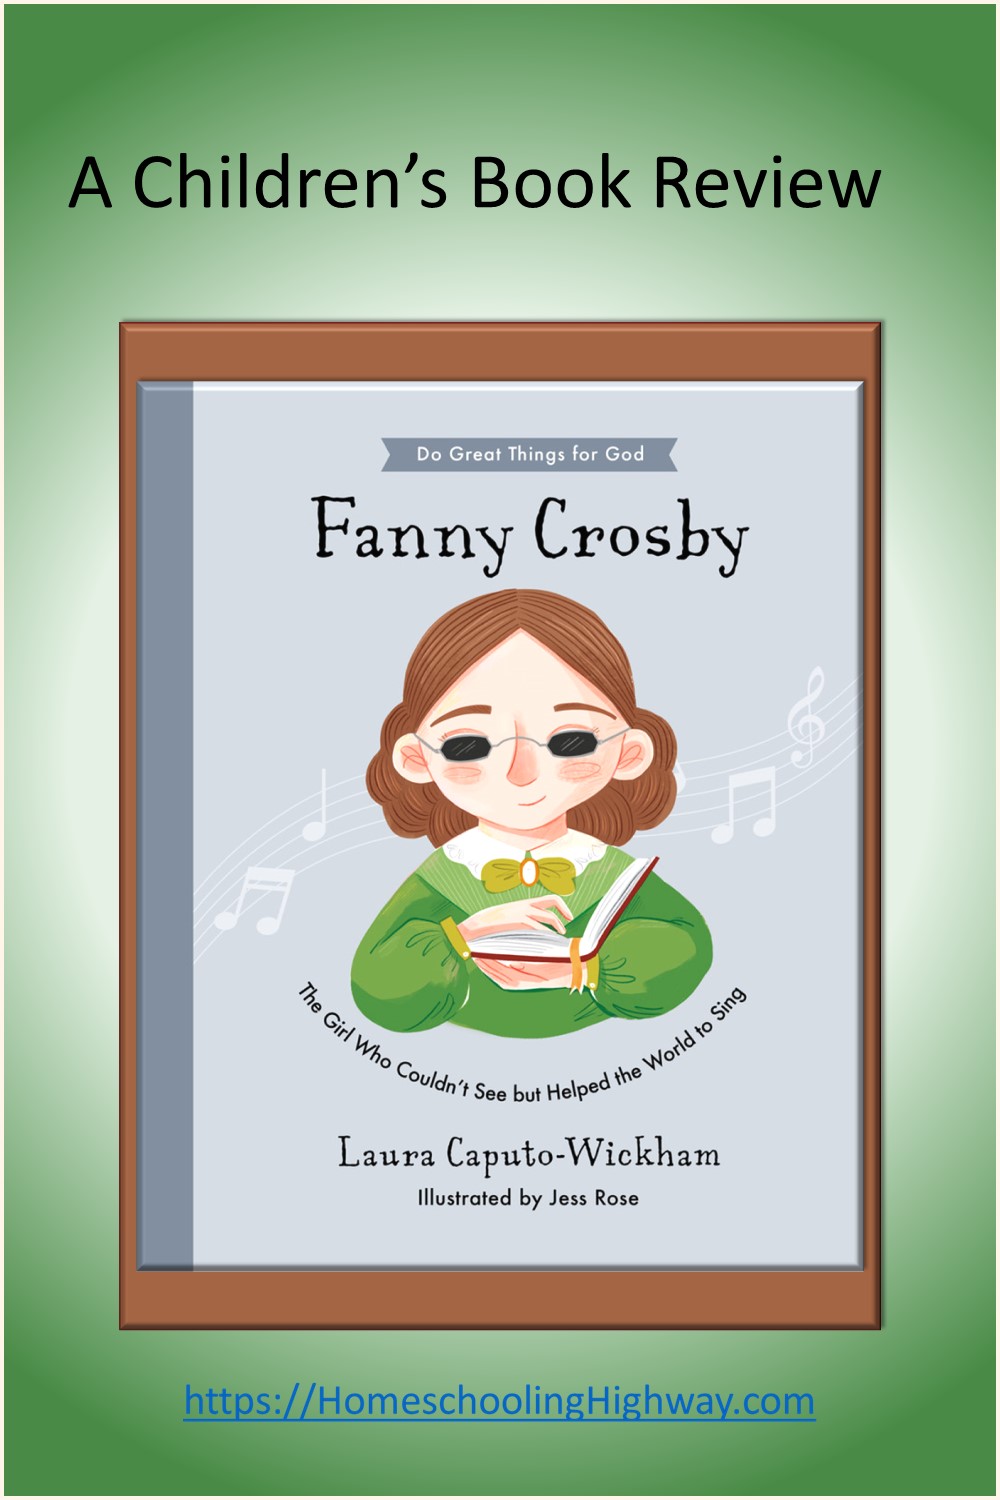 Fanny Crosby: The Girl Who Couldn't See but Helped the World to Sing. Reviewed by Homeschooling Highway